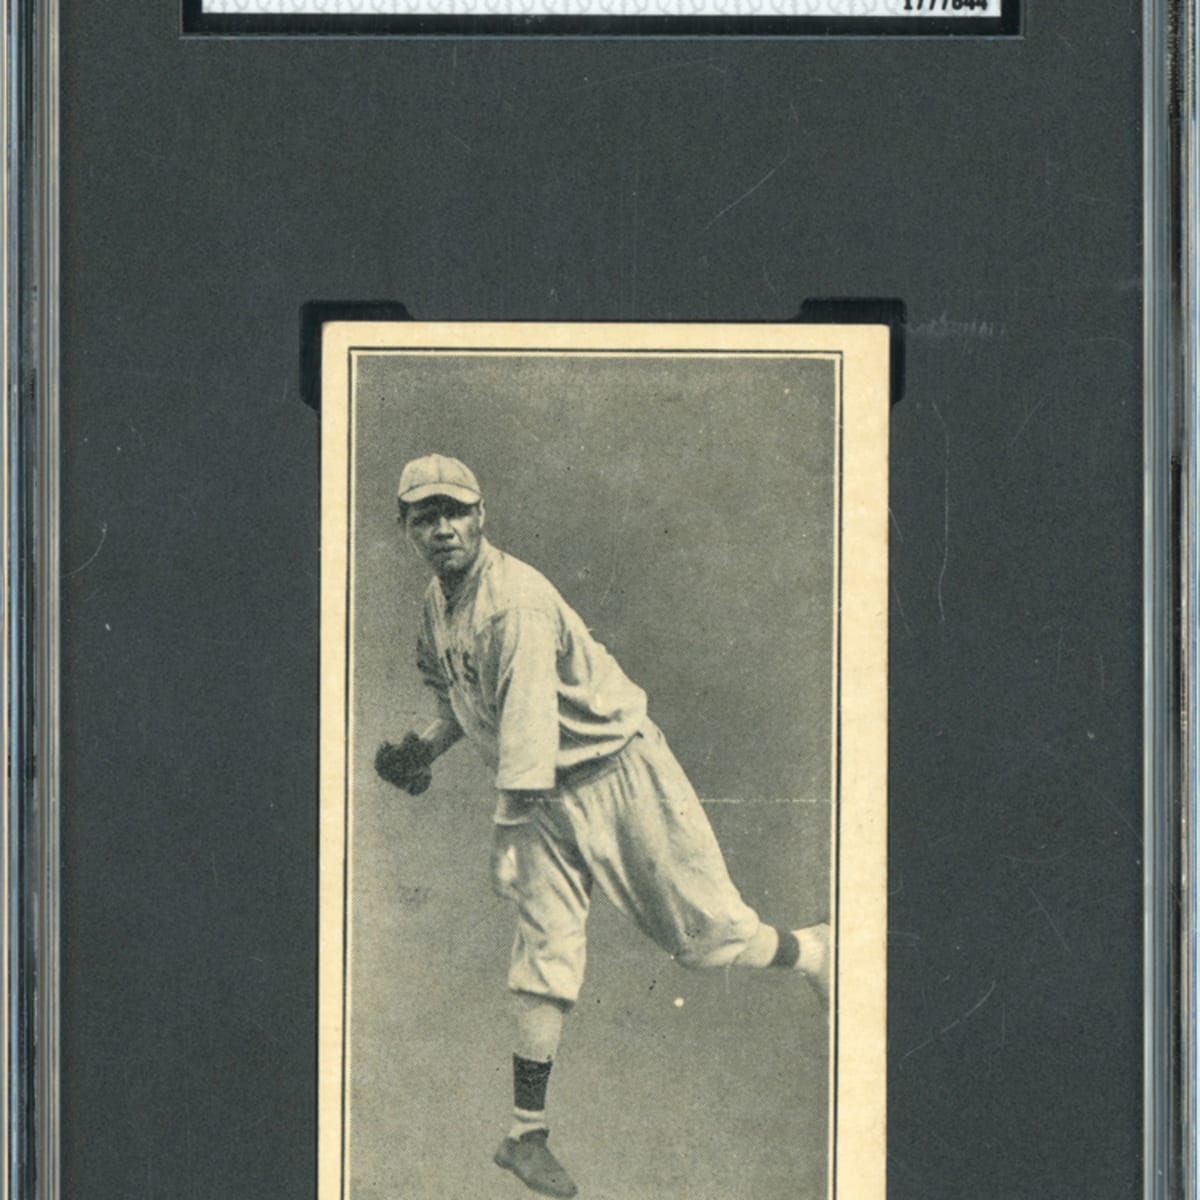 Babe Ruth rookie card, 1927 movie banner top $10M Memory Lane auction -  Sports Collectors Digest